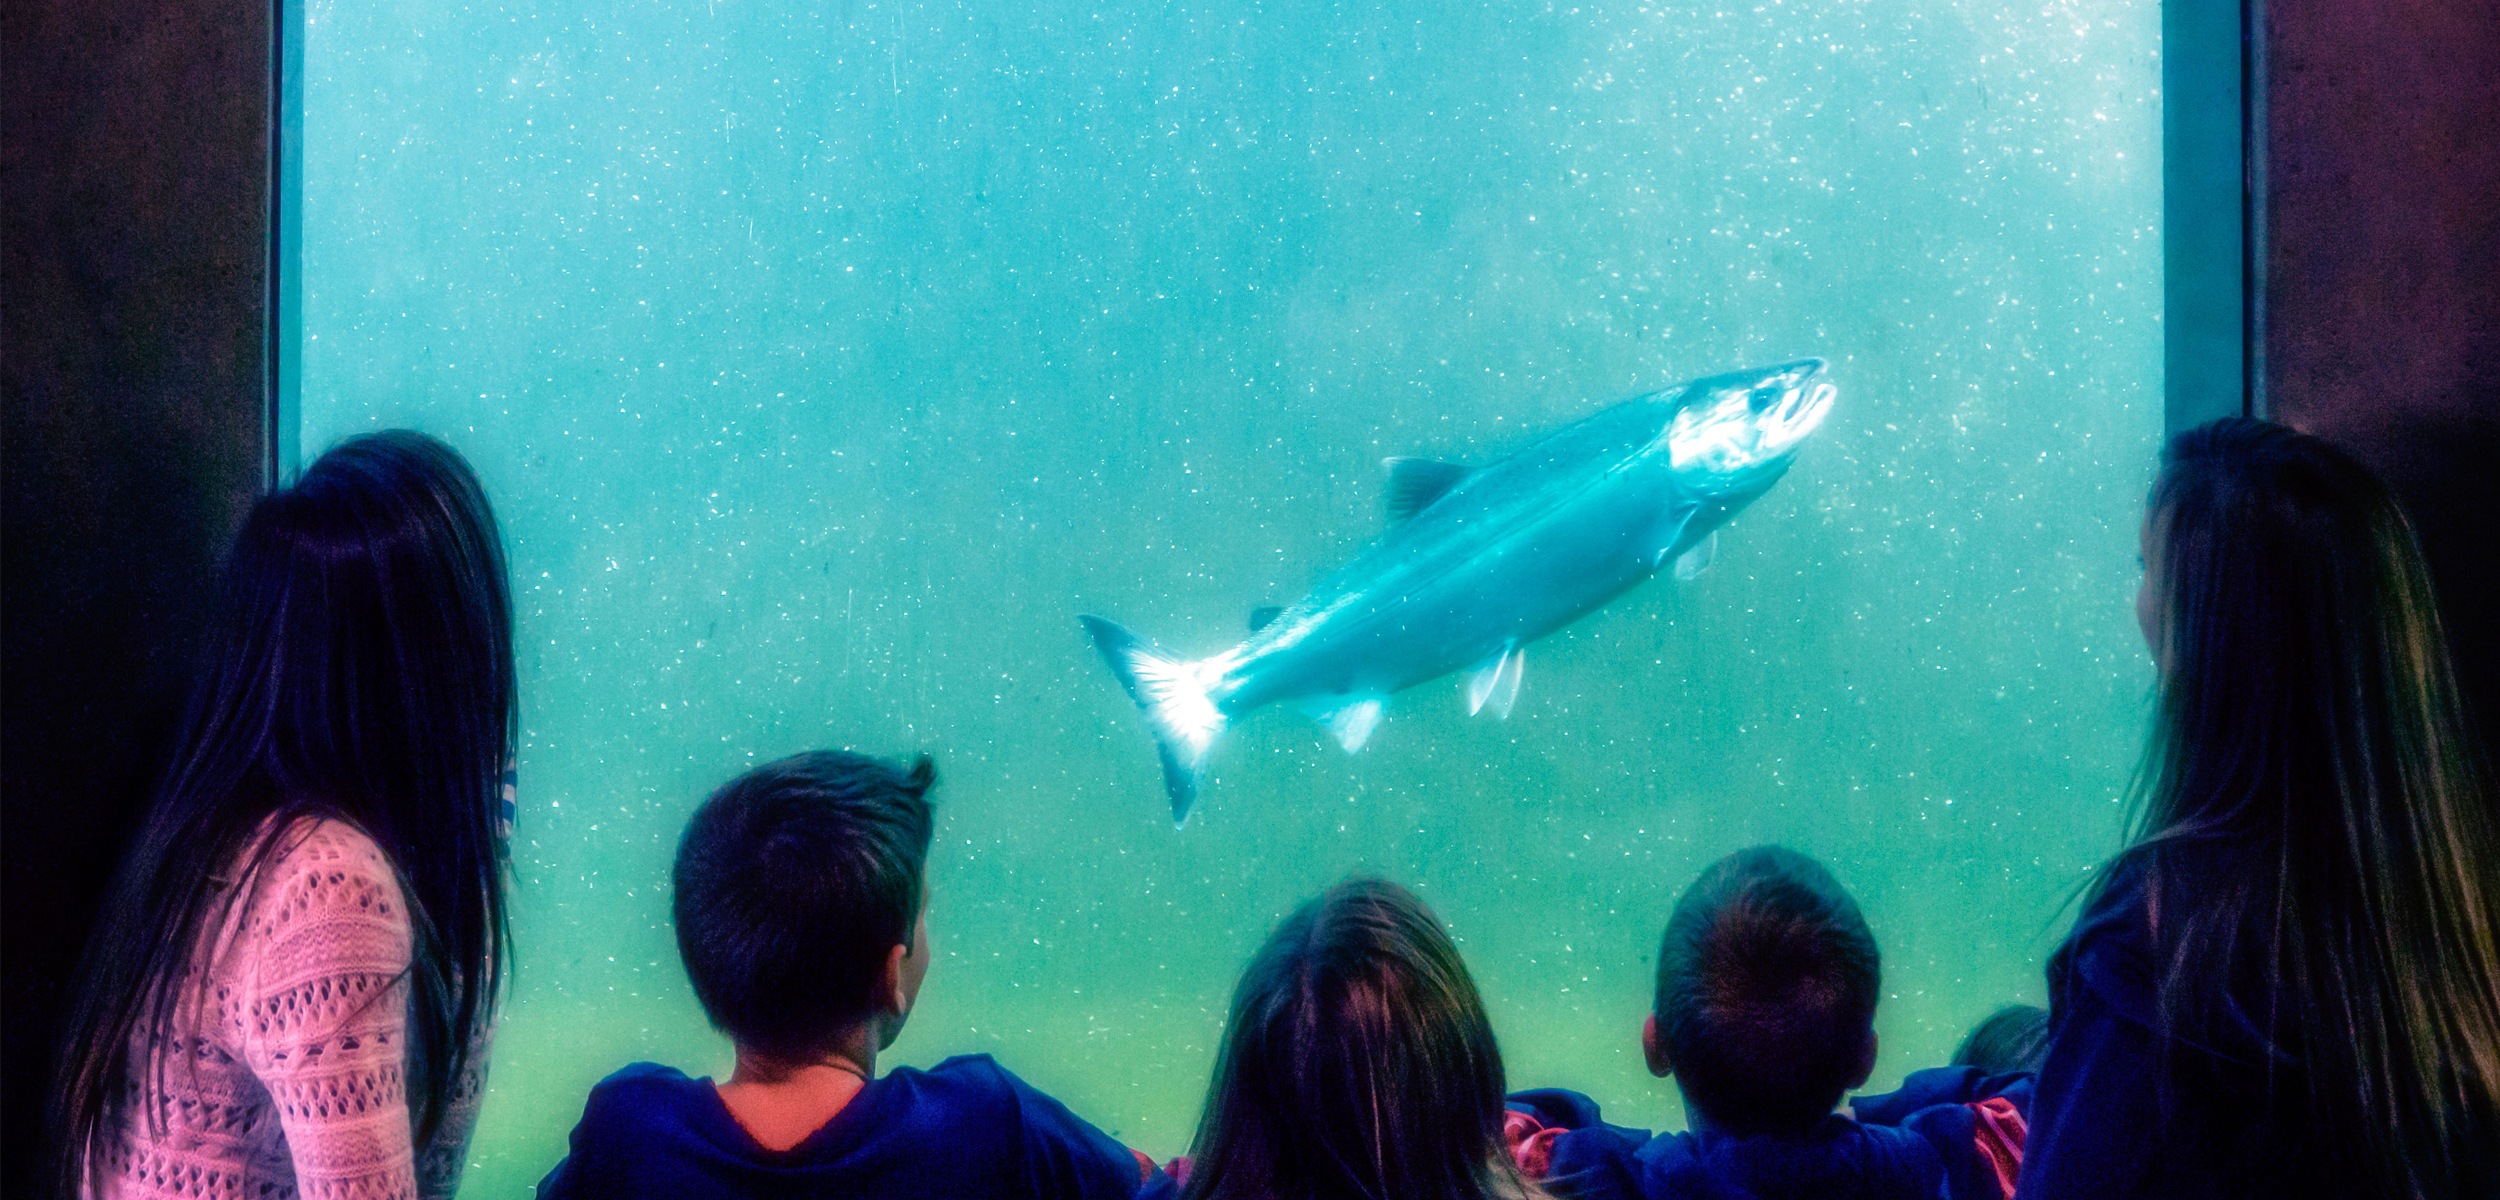 5 Children sitting behind glass watching a large salmon swim in the turquoise water.